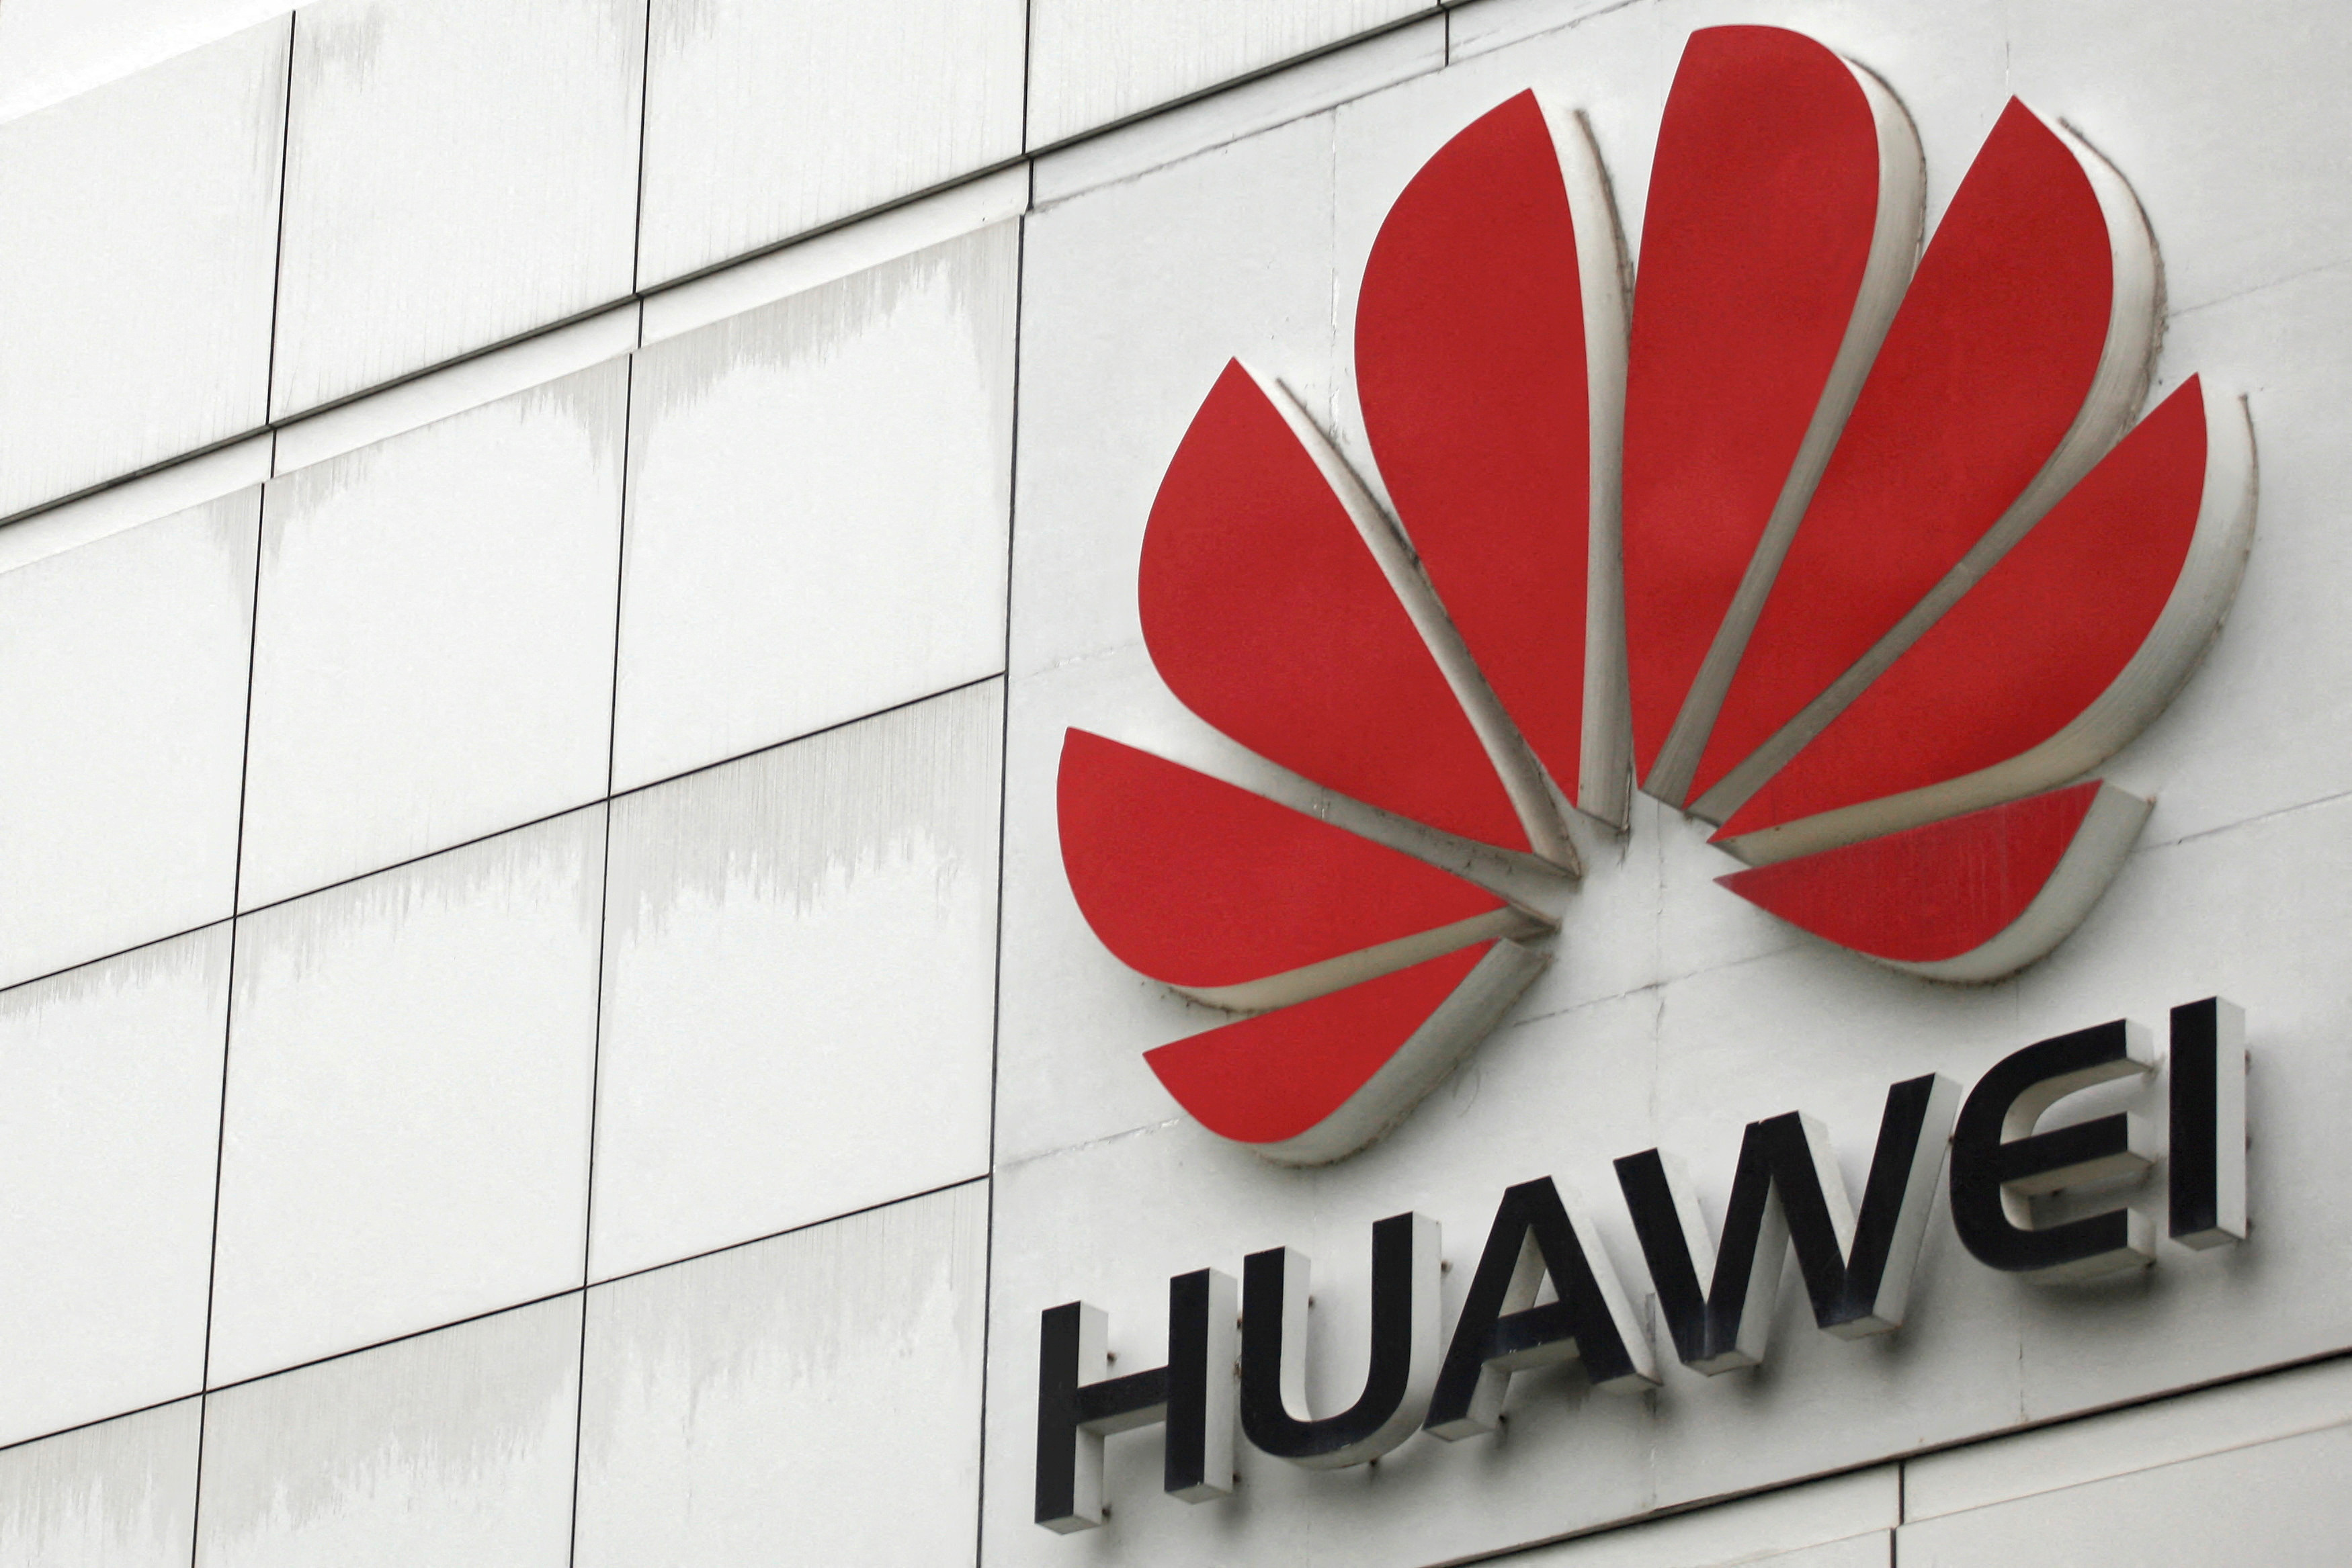 The logo of the Huawei Technologies Co. Ltd. is seen outside its headquarters in Shenzhen, Guangdong province